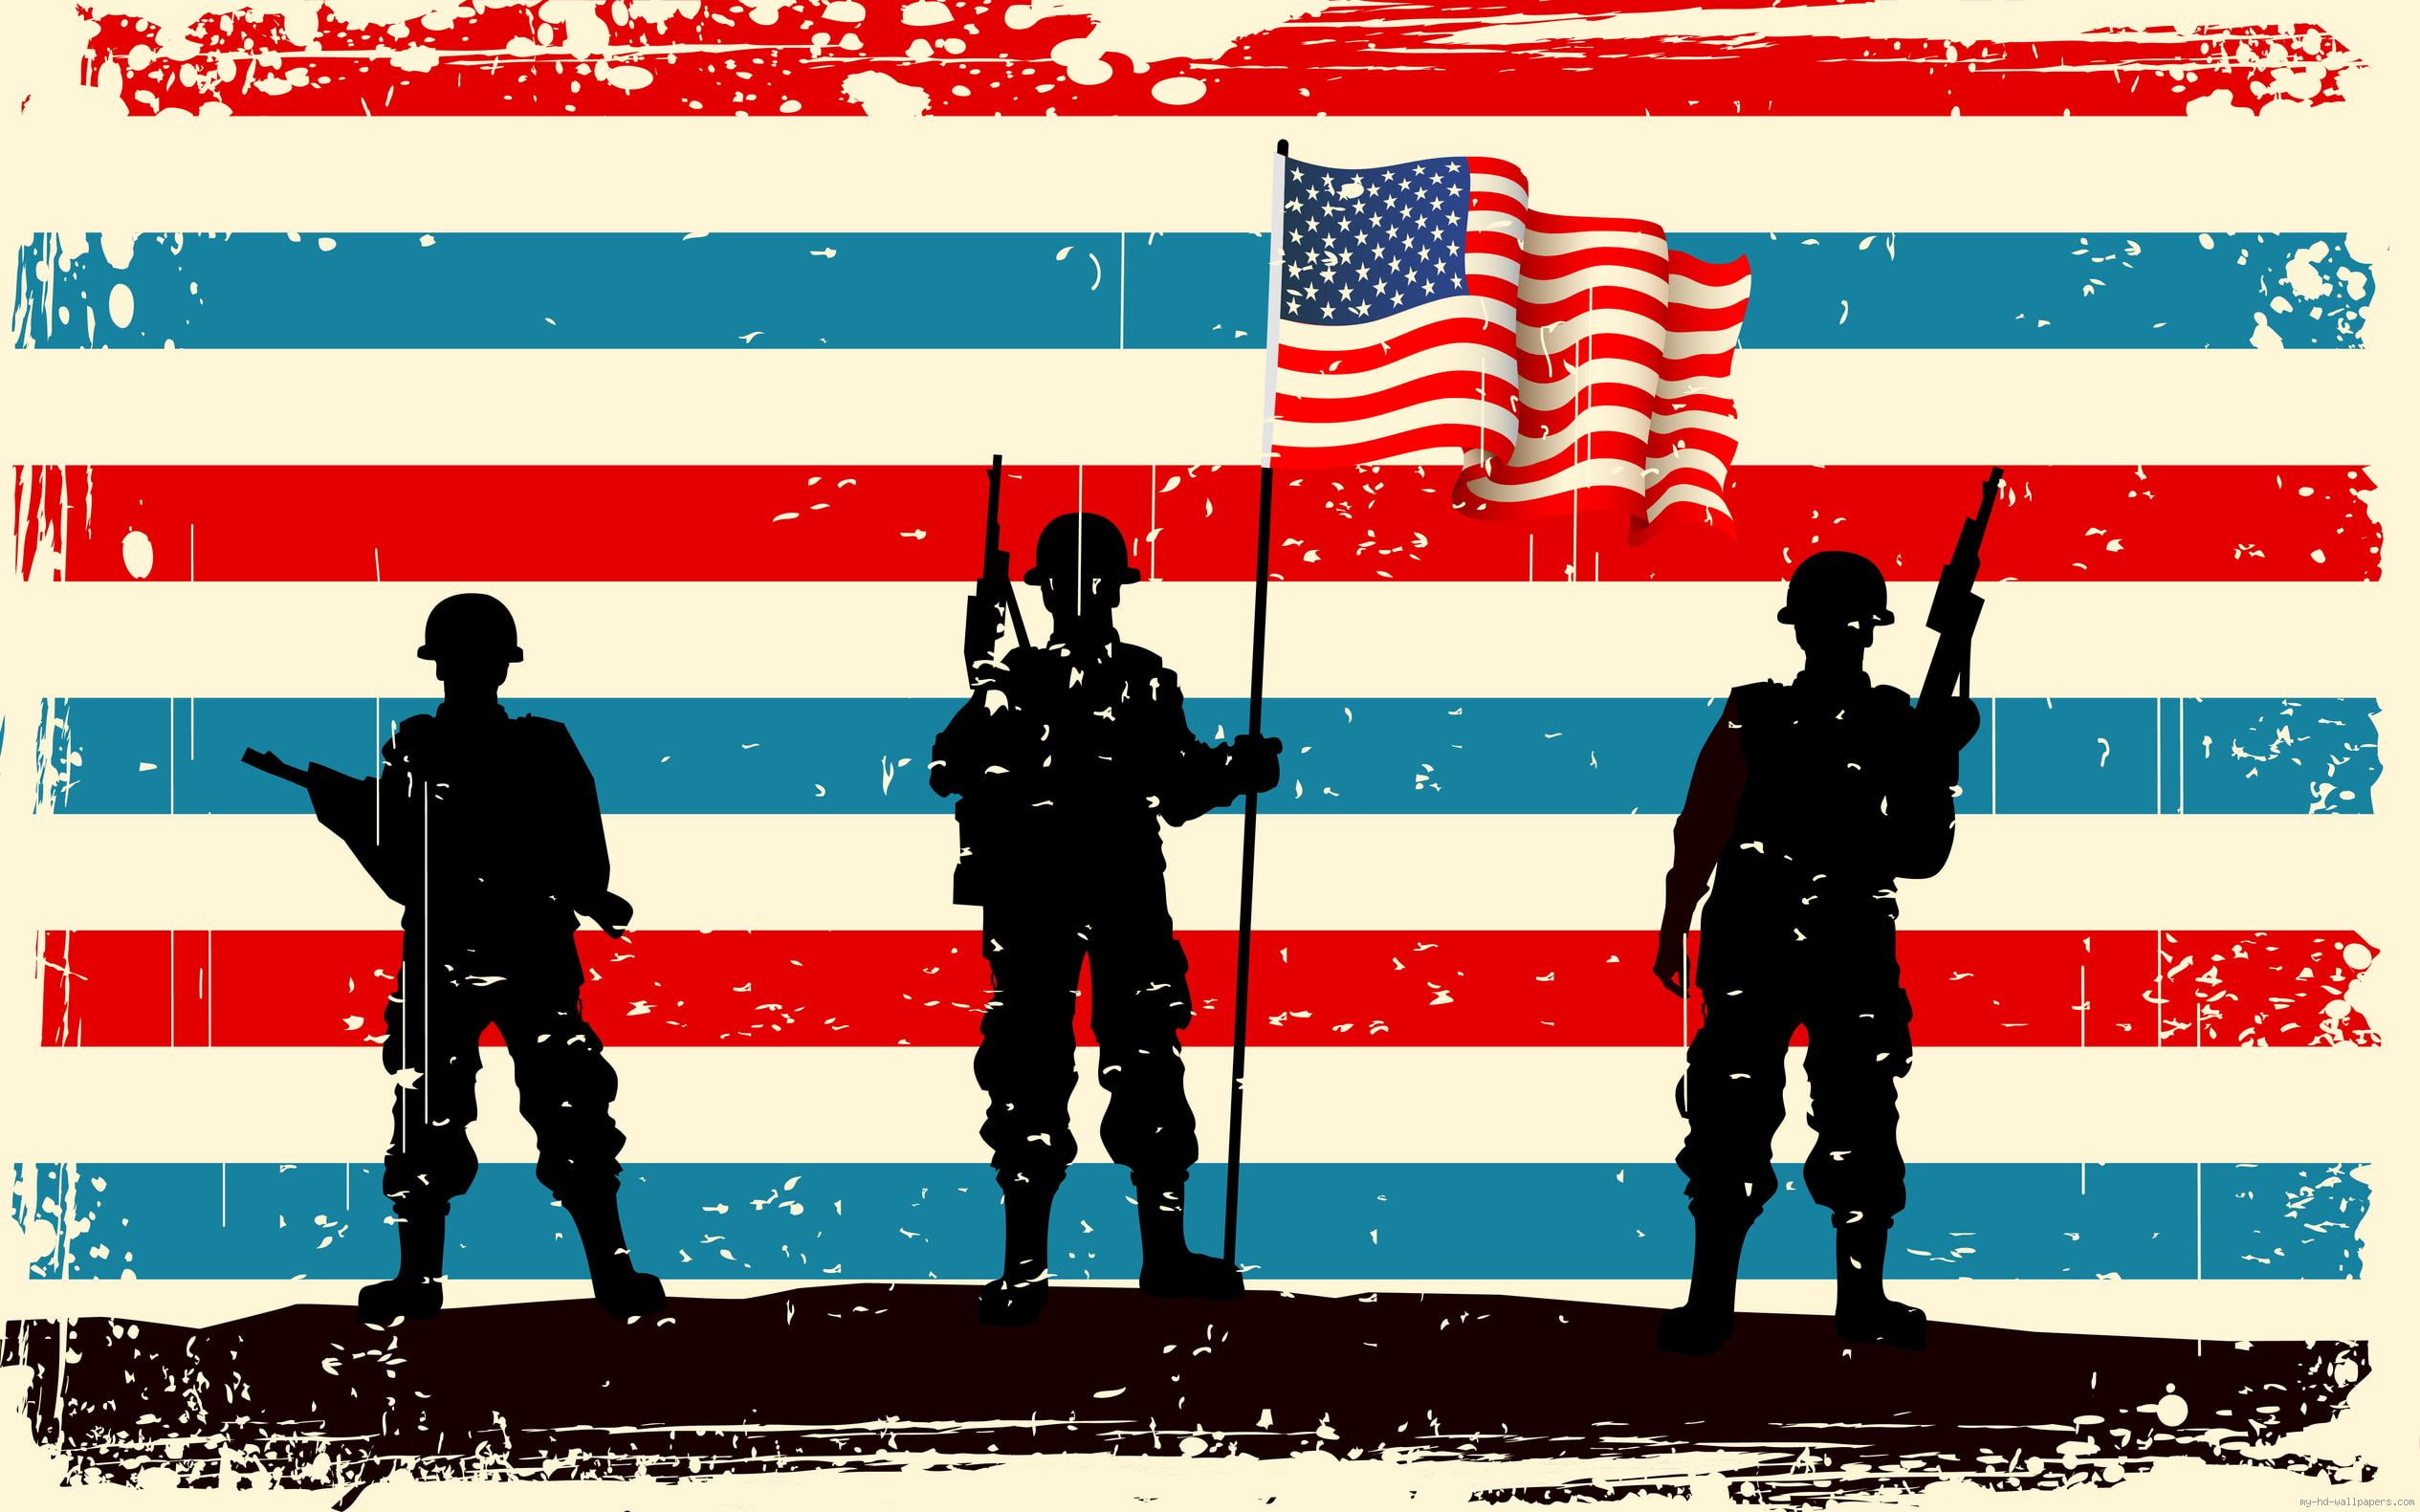 American soldiers remember, silhouette of 2 soldiers and 1 soldier holding an american flag